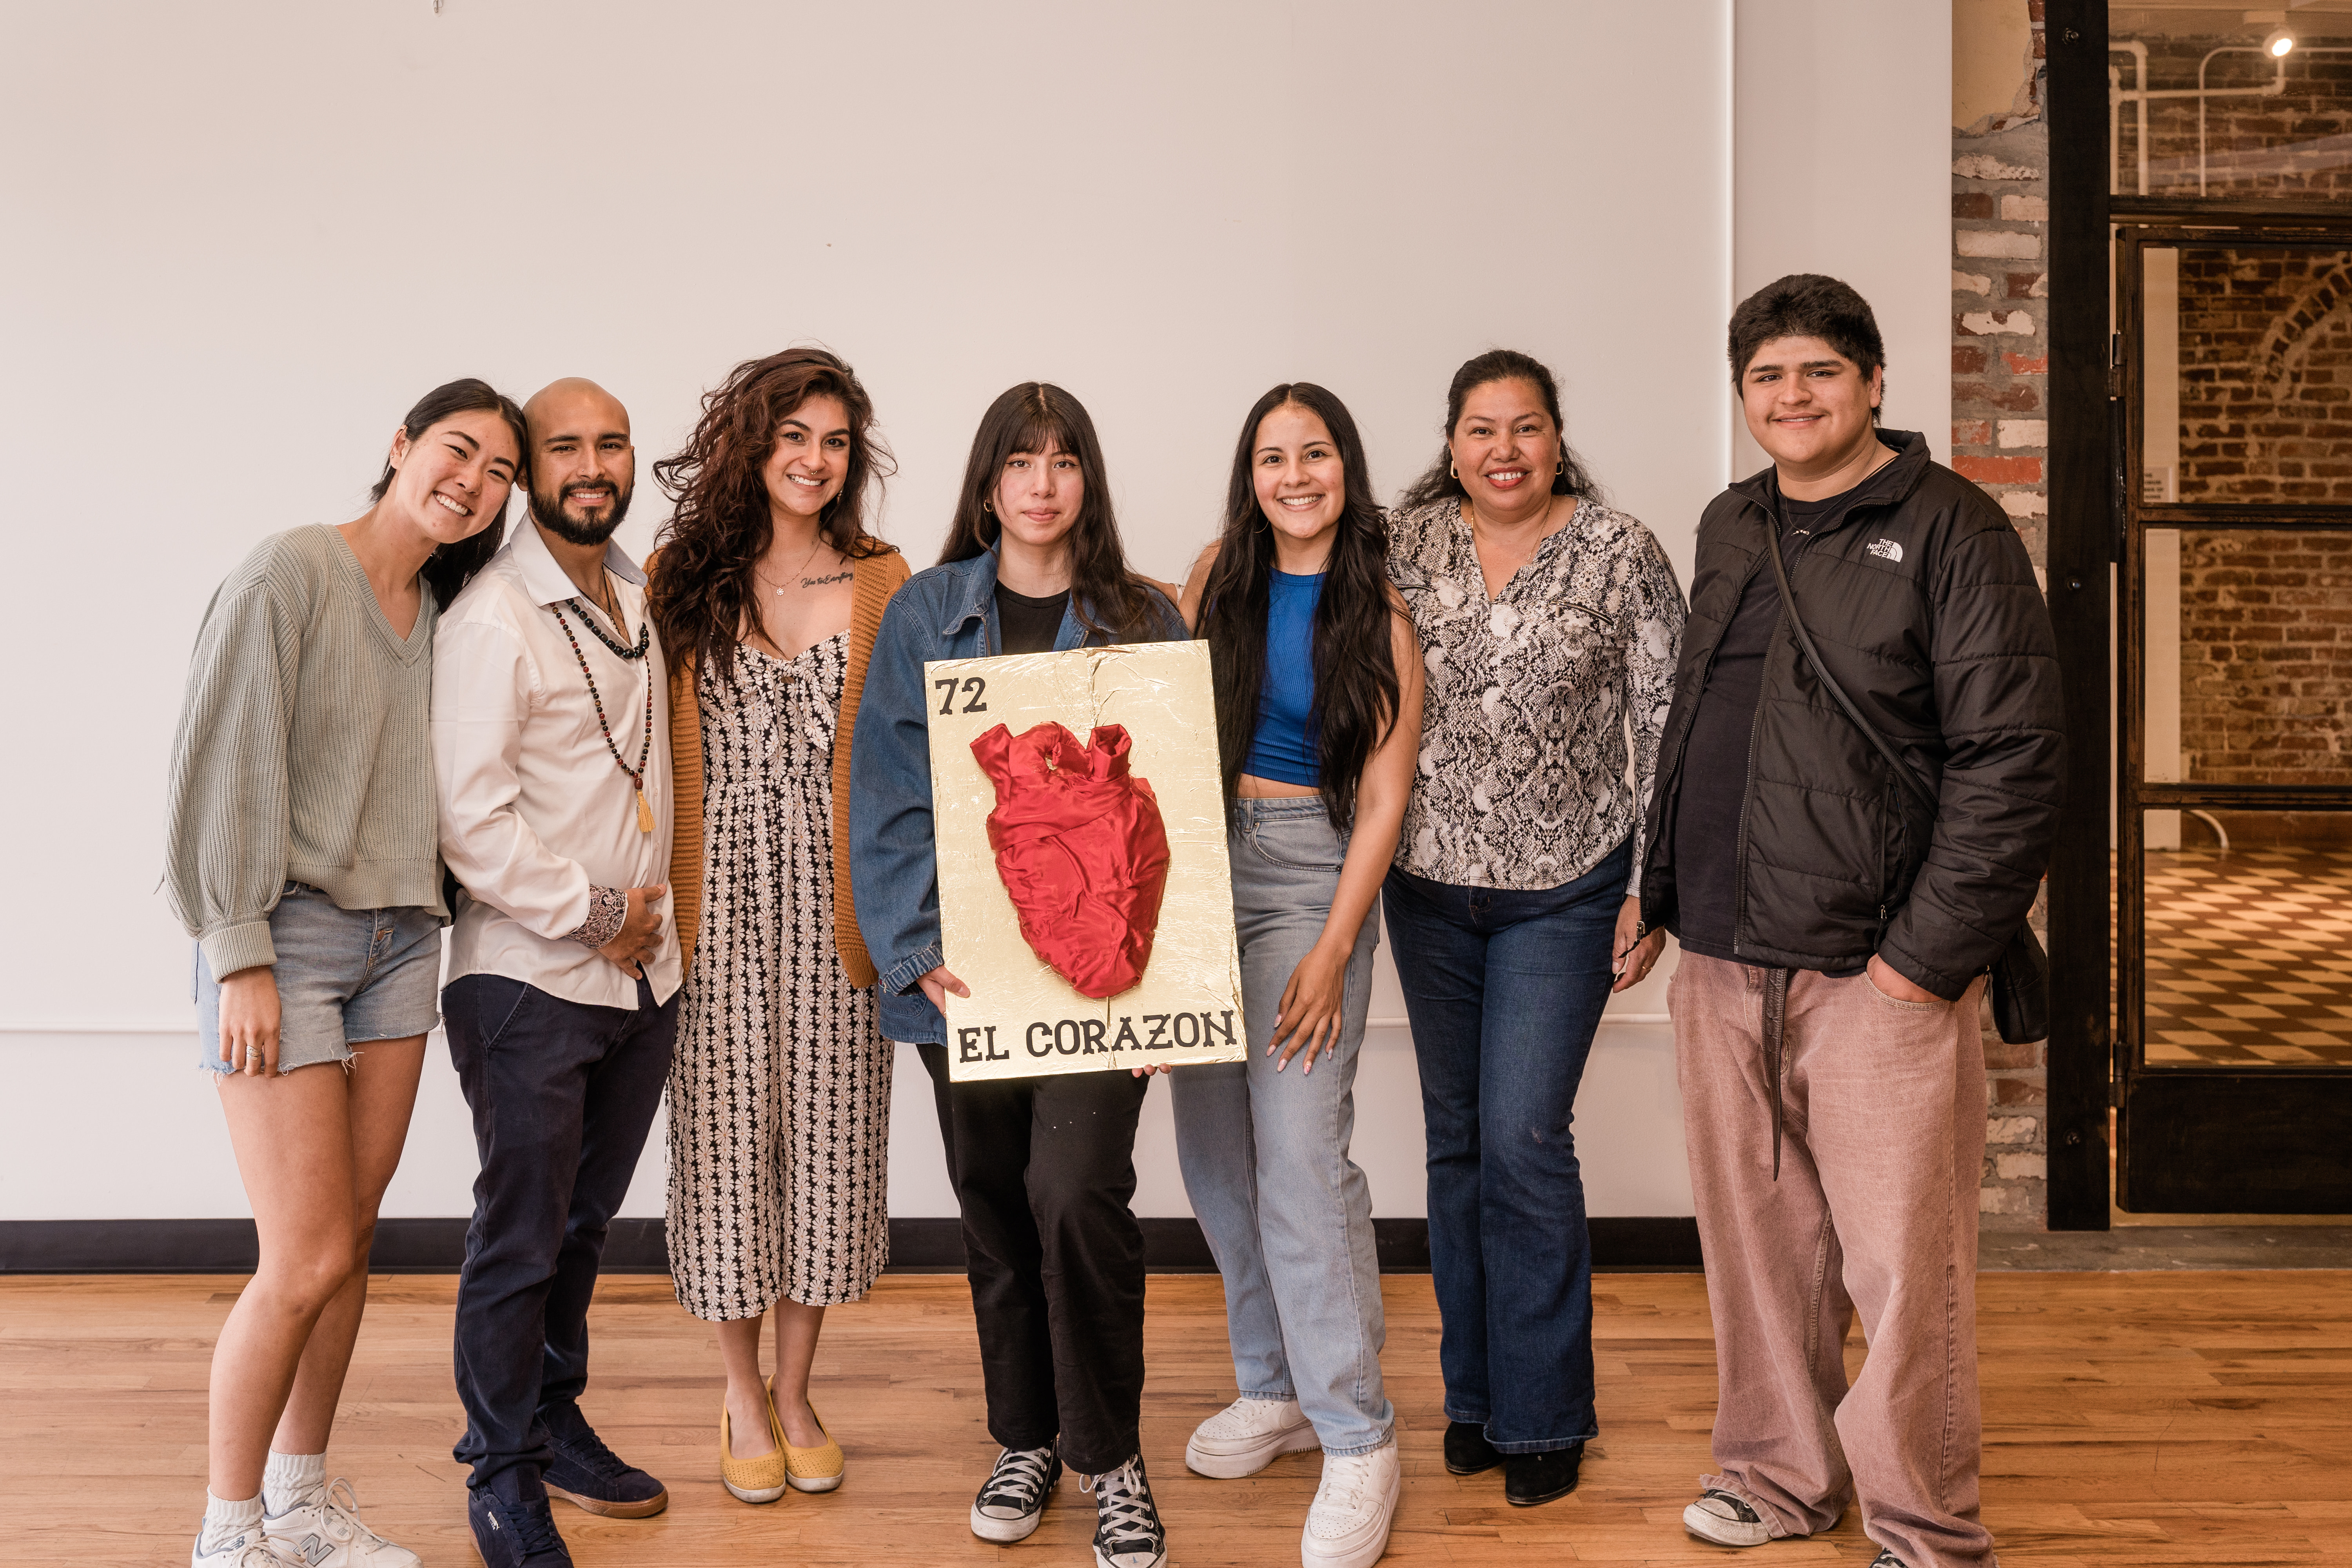 a photo of a young woman and her family. she is holding a crafted heart on a gold background called El Corazon